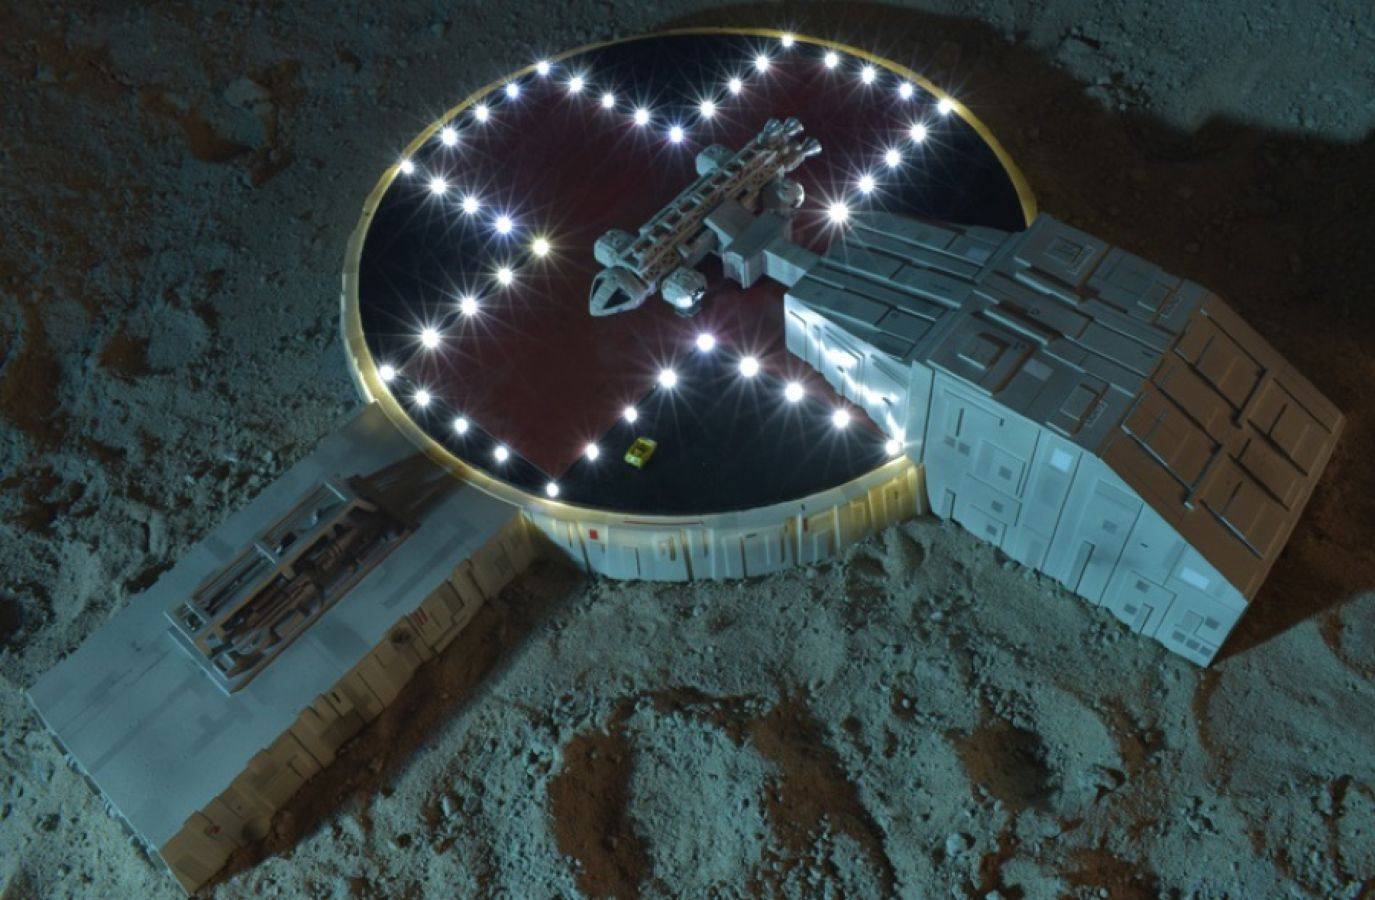 Space 1999 - Electronic Alpha Launch Pad with Eagle One